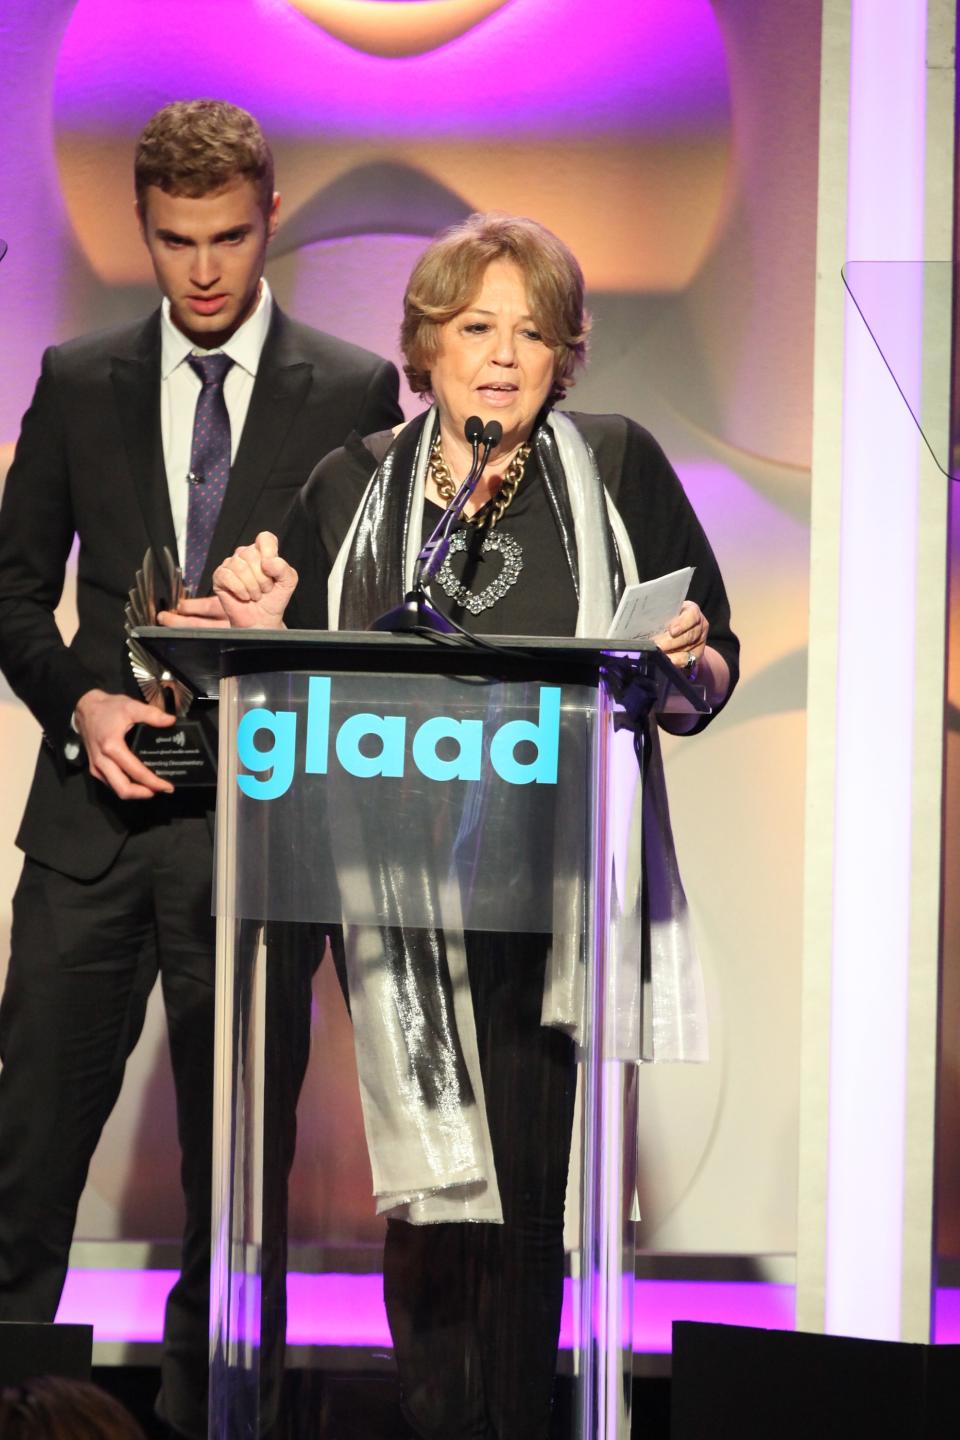 Producer Linda Bloodworth Thomason and filmmaker Shane Bitney Crone at the GLAAD Media Awards in Los Angeles in 2014. (Photo by Gabriel Olsen/Getty Images)